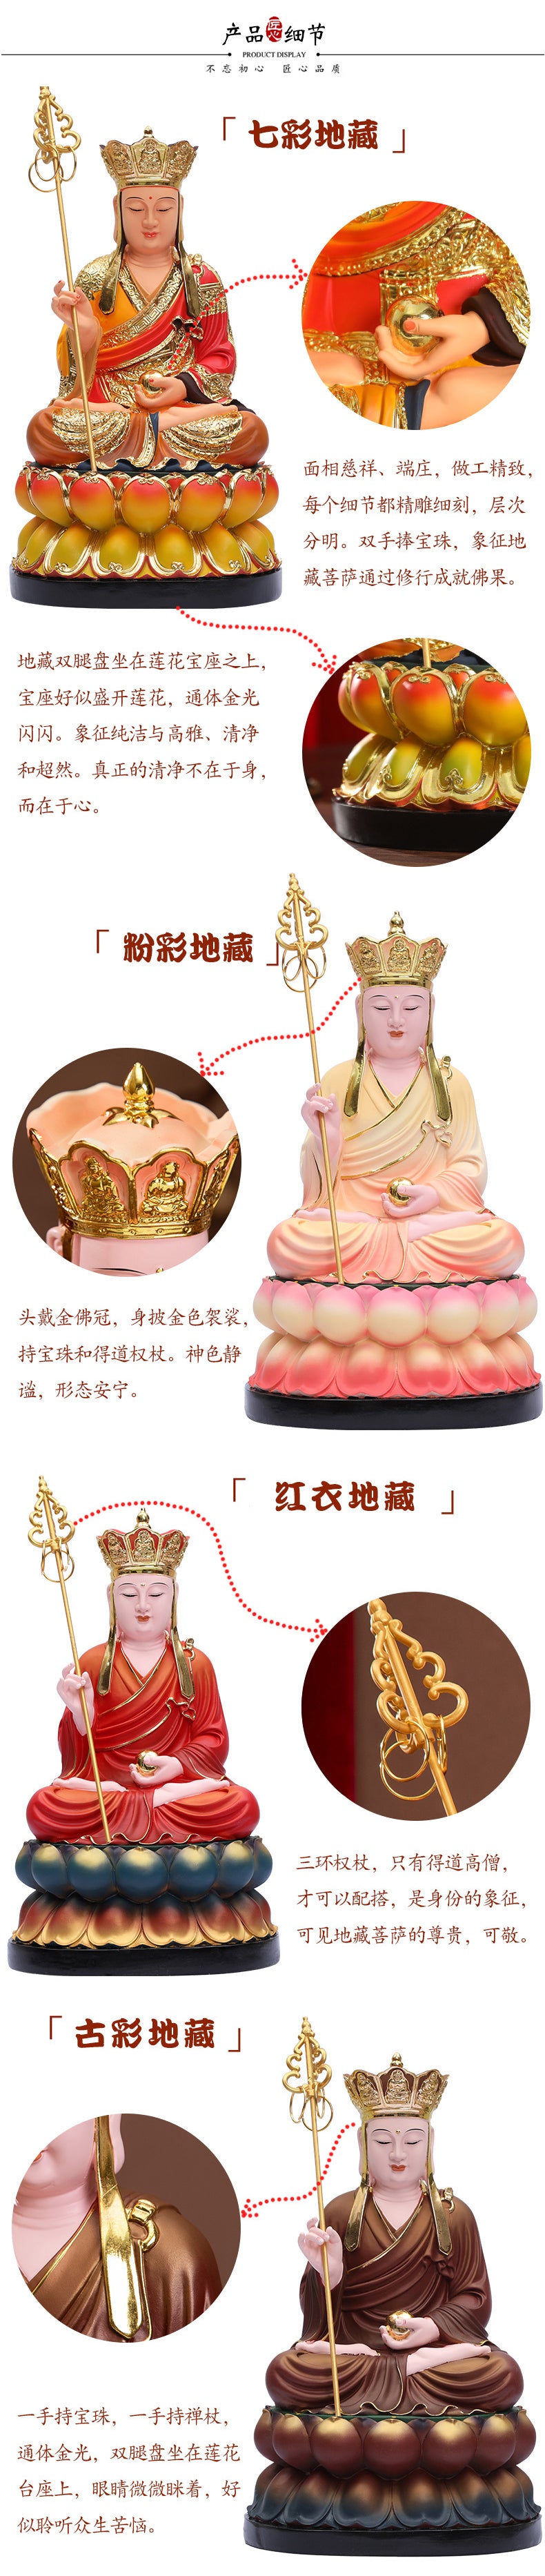 Ksitigarbha Bodhisattva, Earth Womb, Dayuan Dizang Pusa Statue for Sale, Antique Color Resin Material, Offerings Product Detail Statement-3